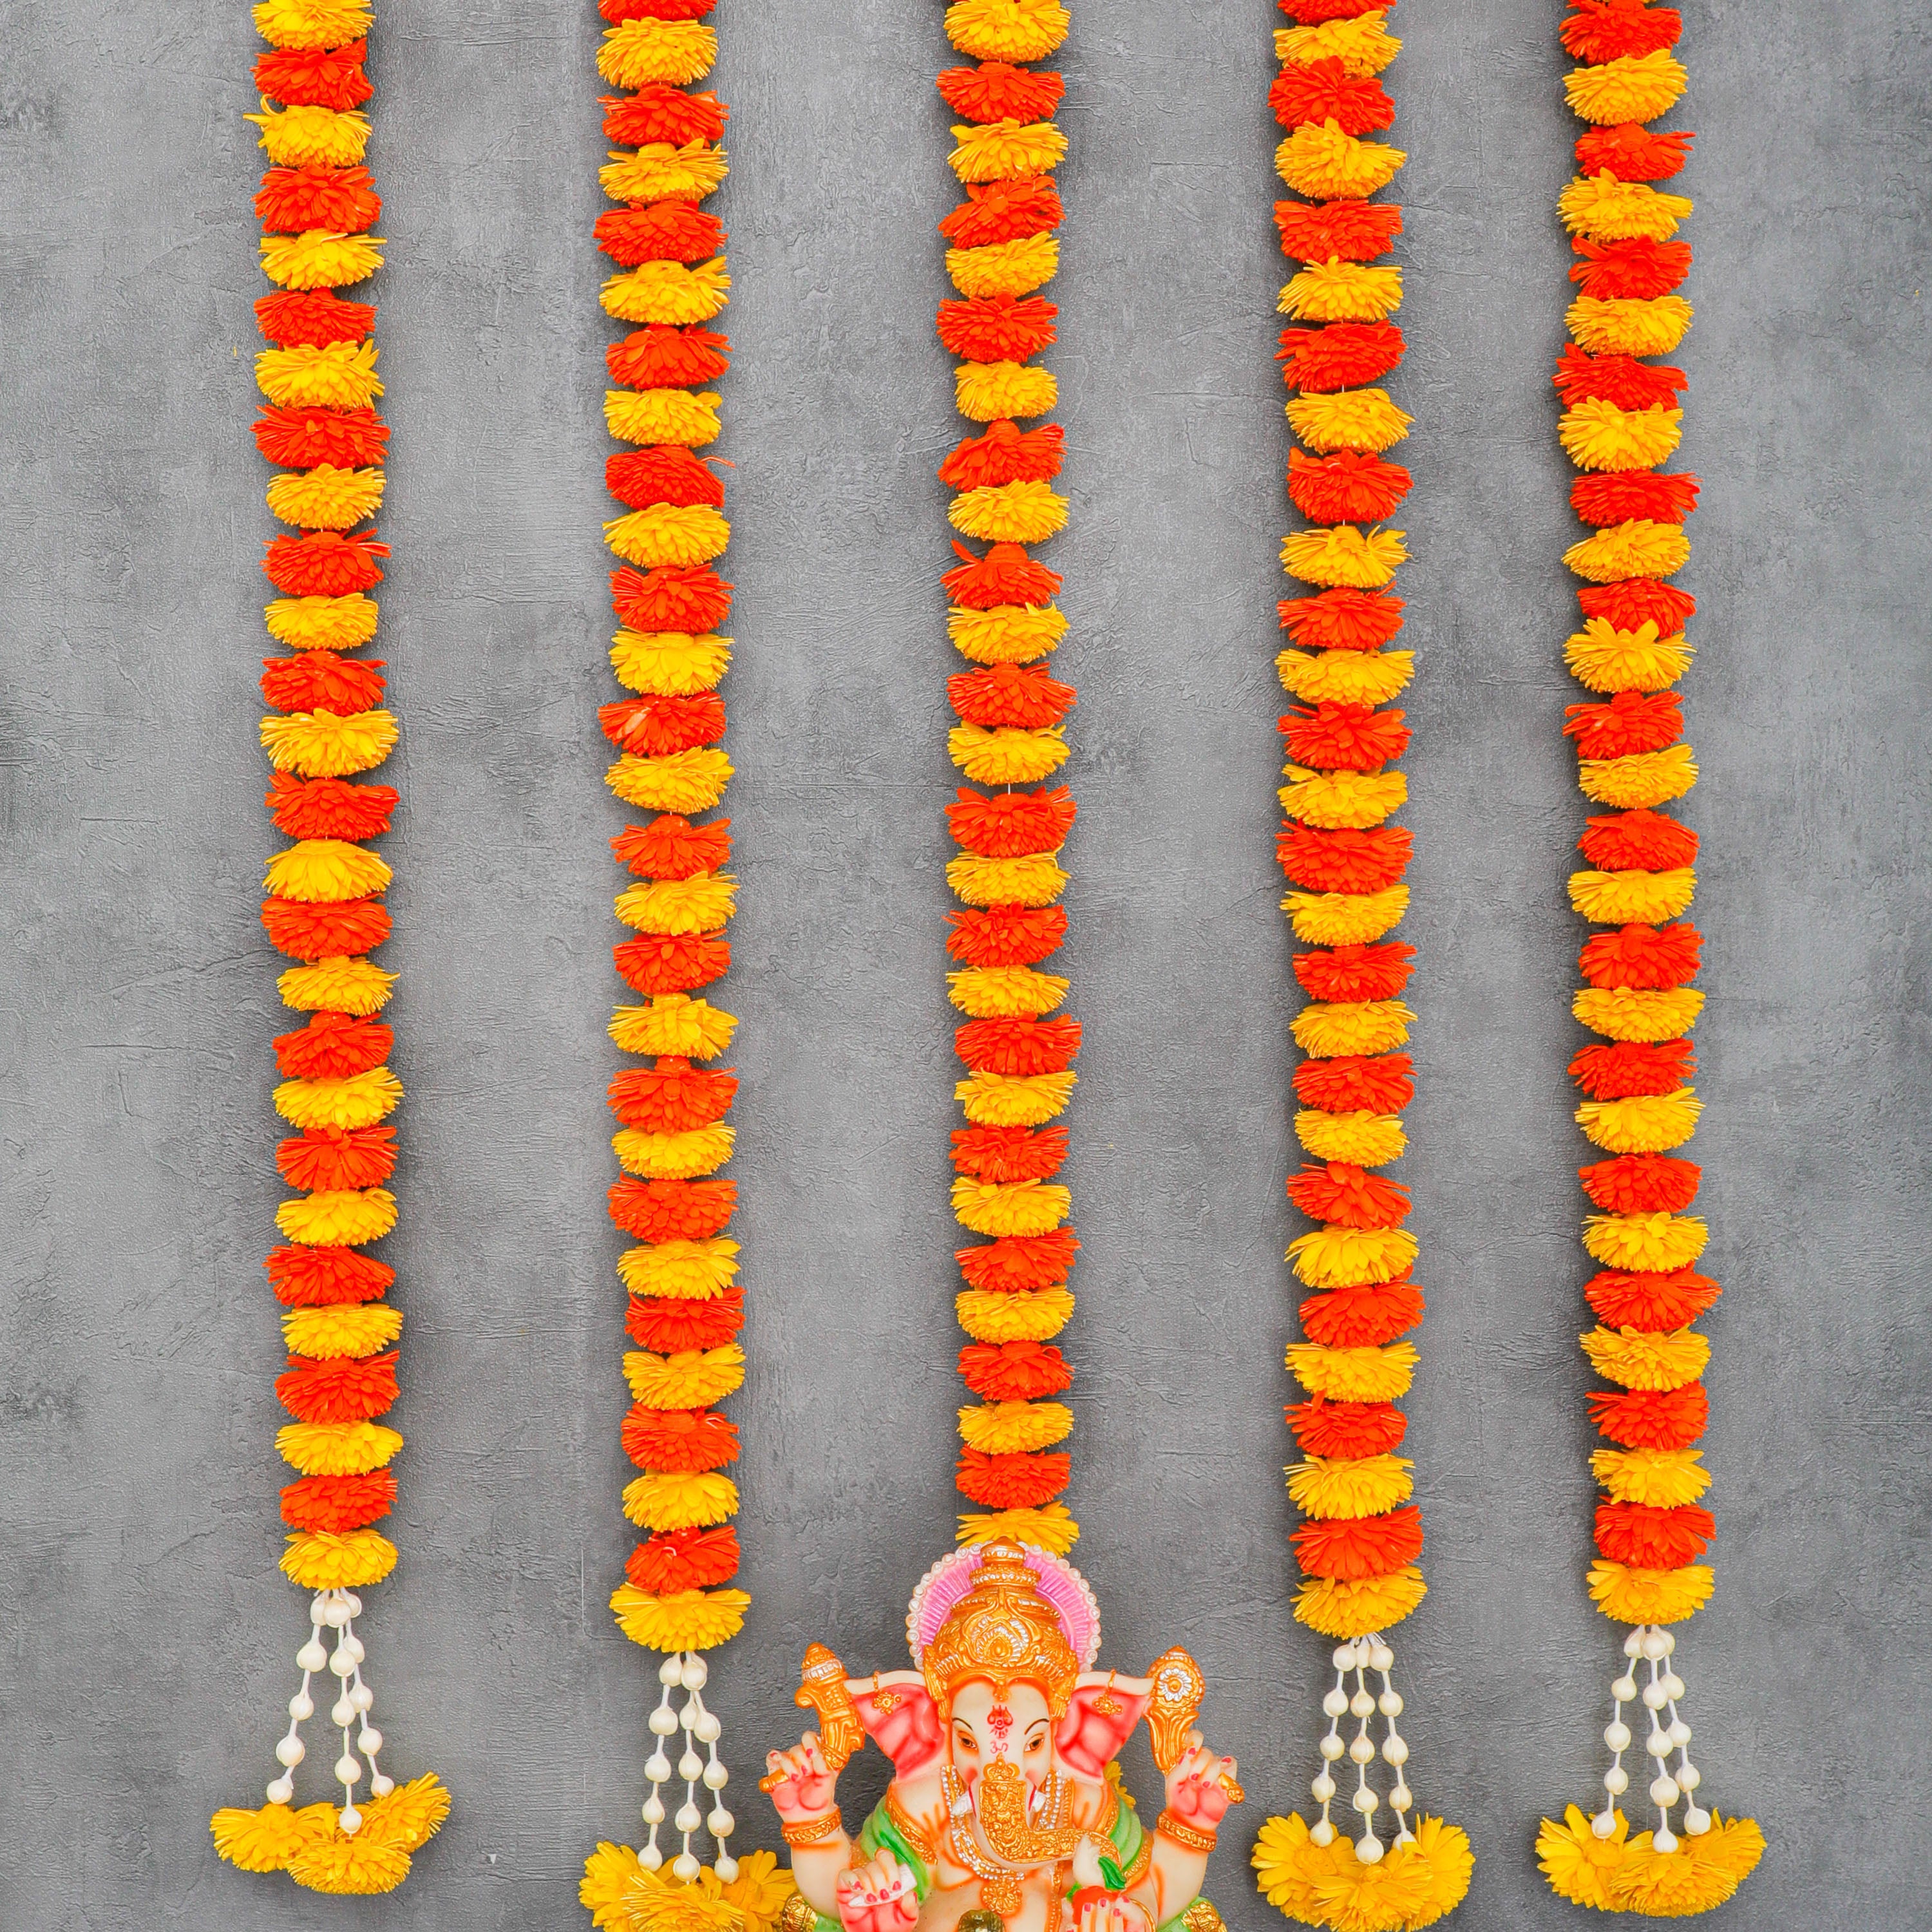 Multicolor Shola Garlands are stunning and made of lightweight and durable Shola wood